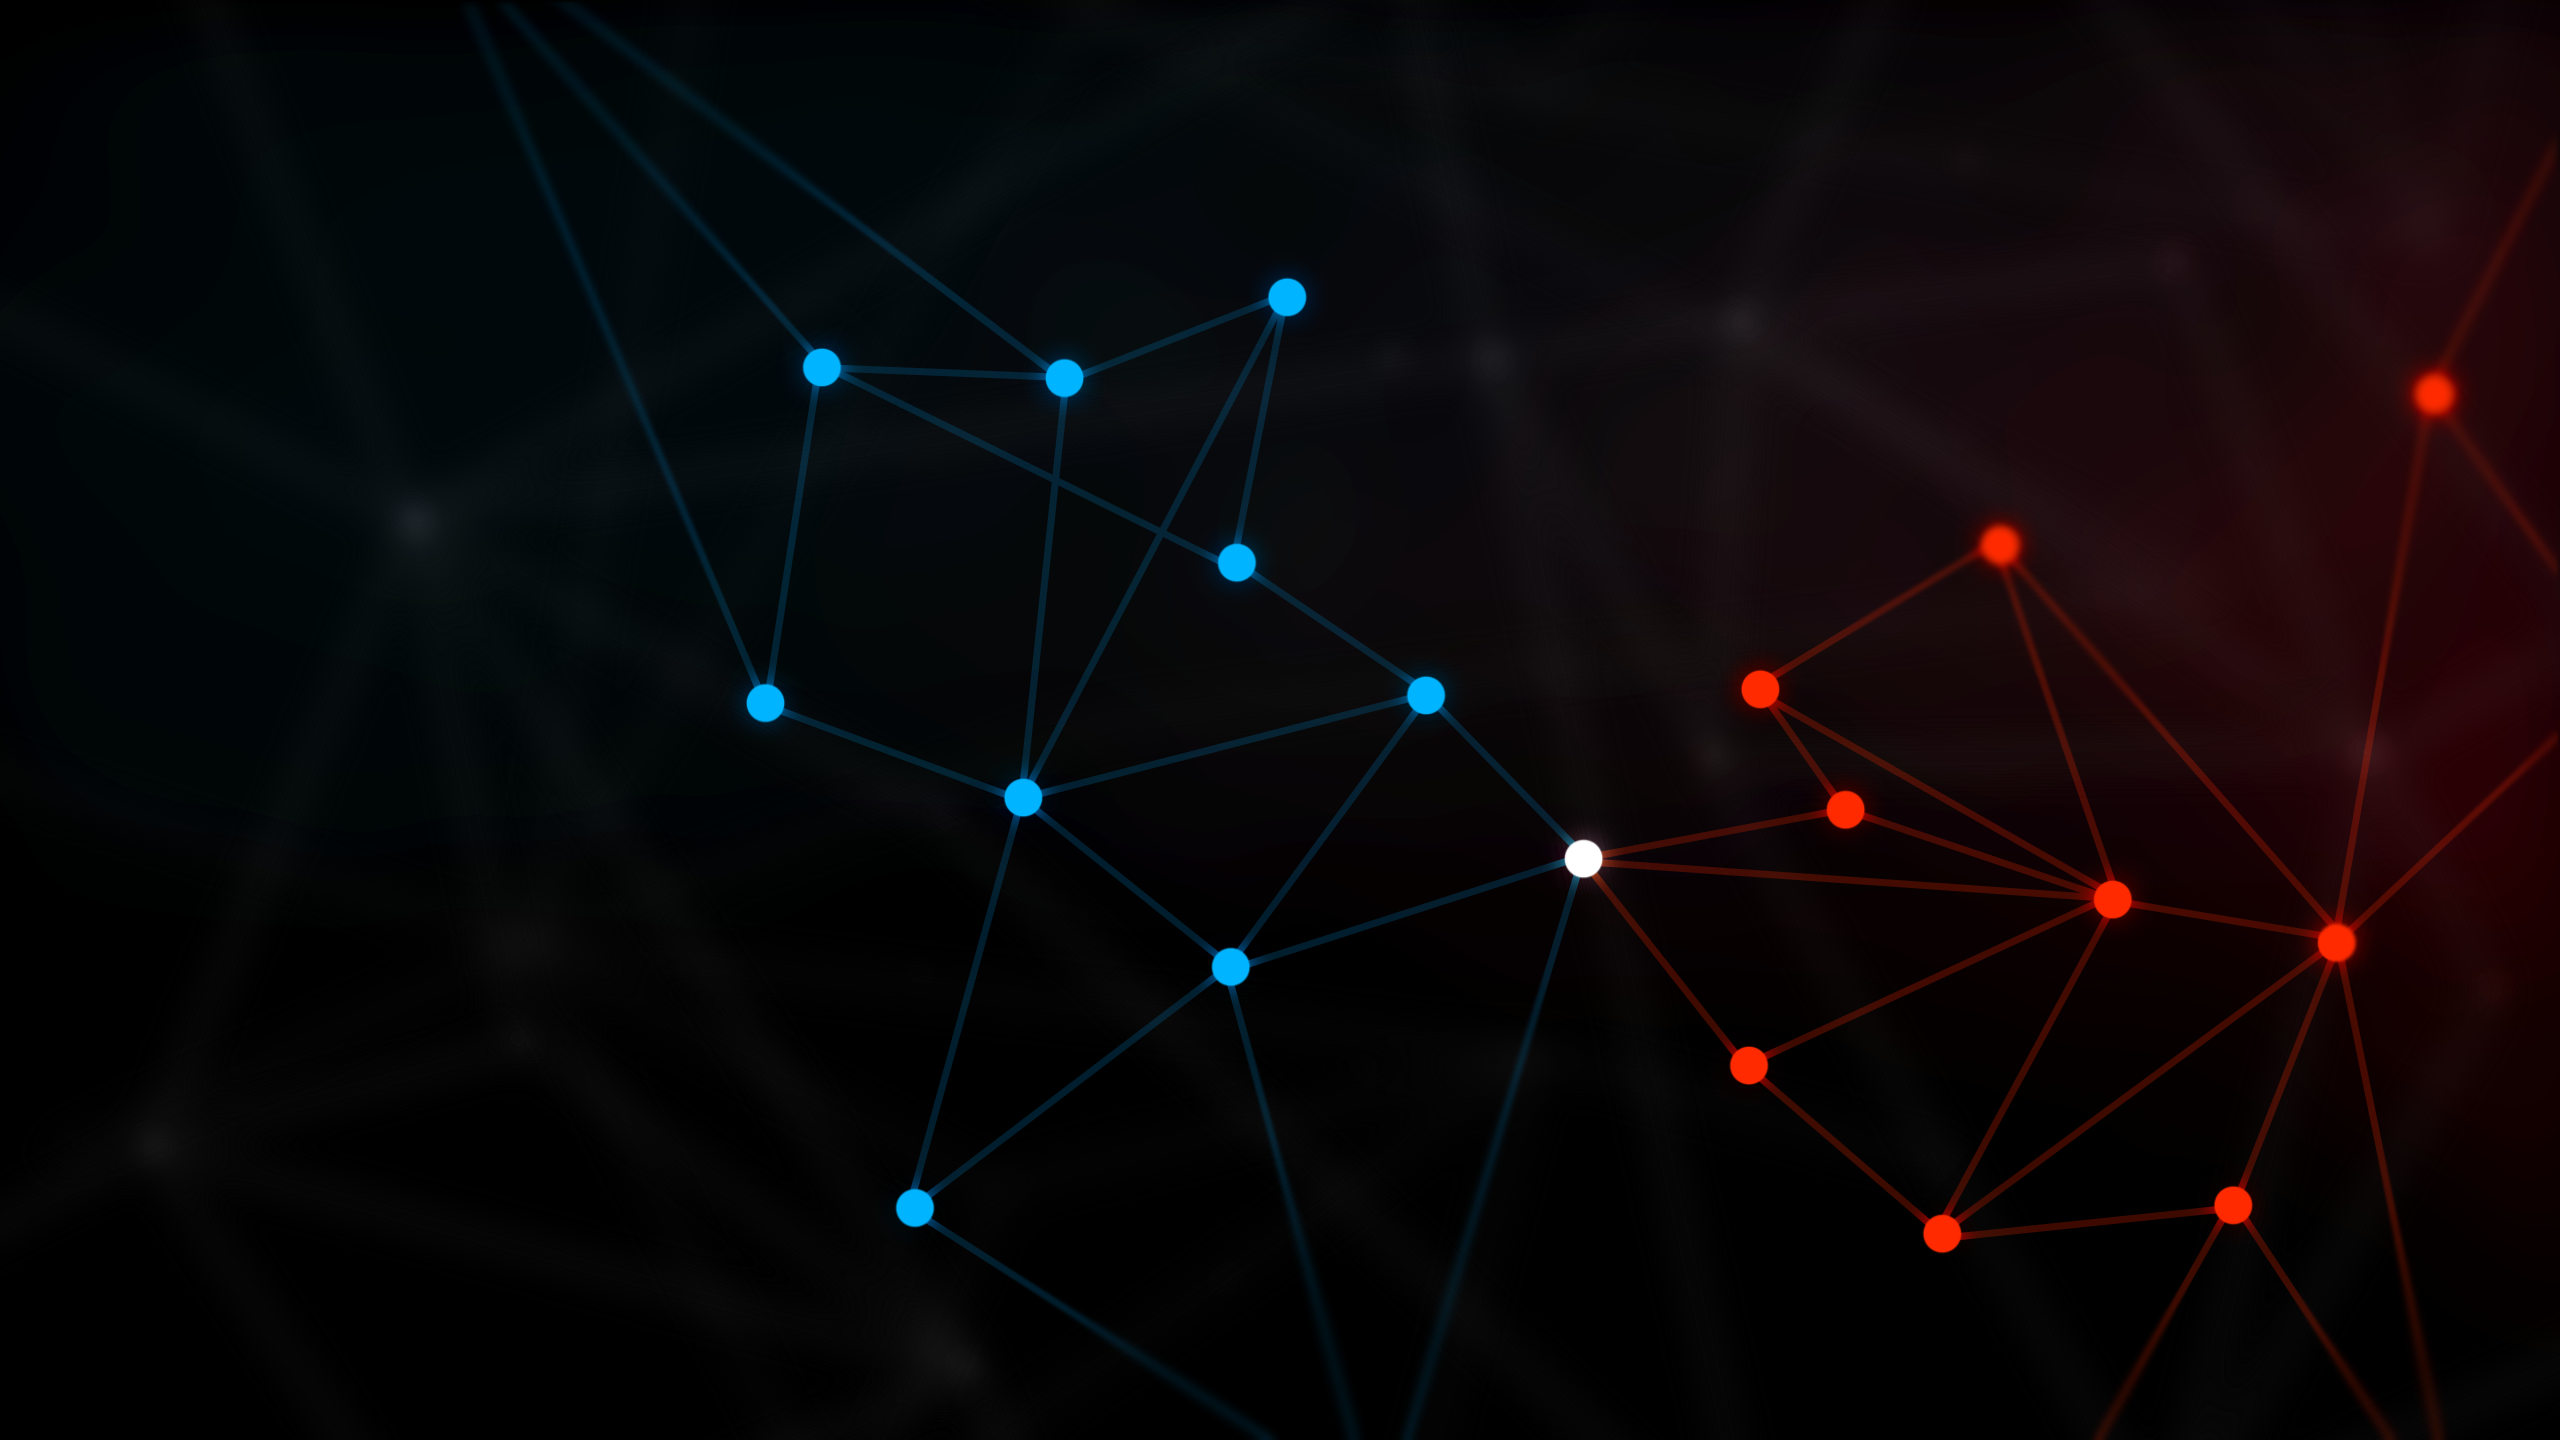 Low Poly Digital Art Network Dots Abstract Lines Red Cyan 2560x1440